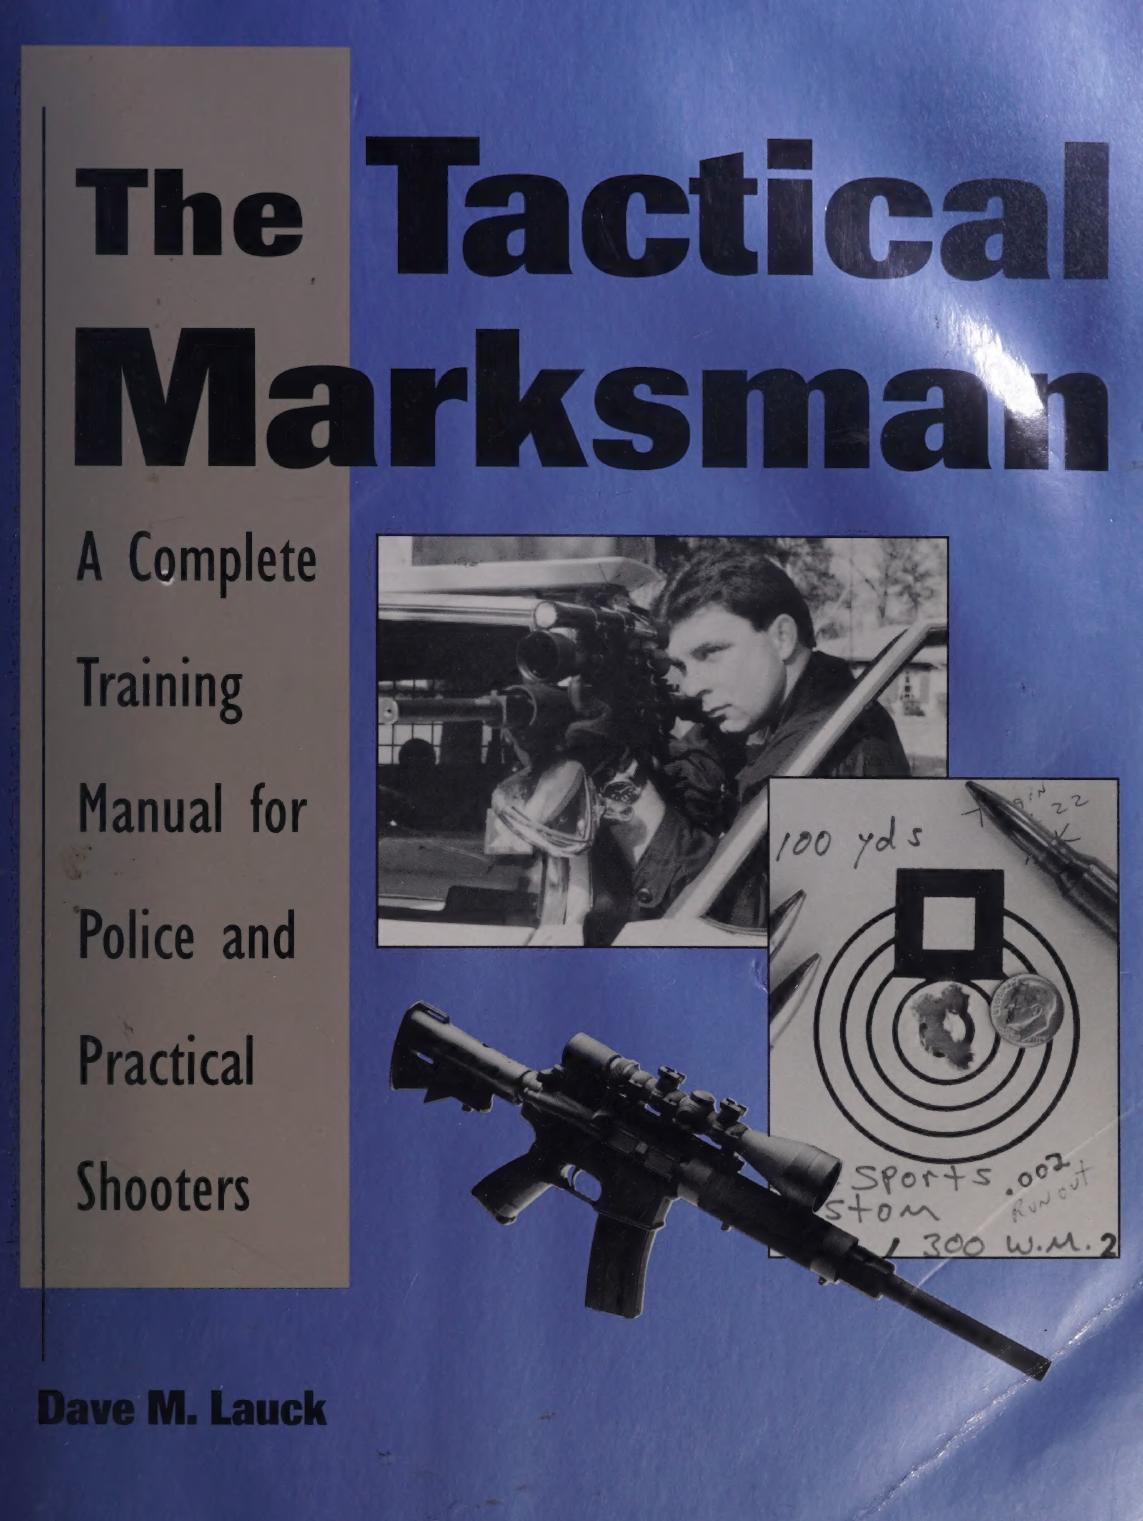 The Tactical Marksman: A Complete Training Manual for Police and Practical Shooters by Dave M. Lauck